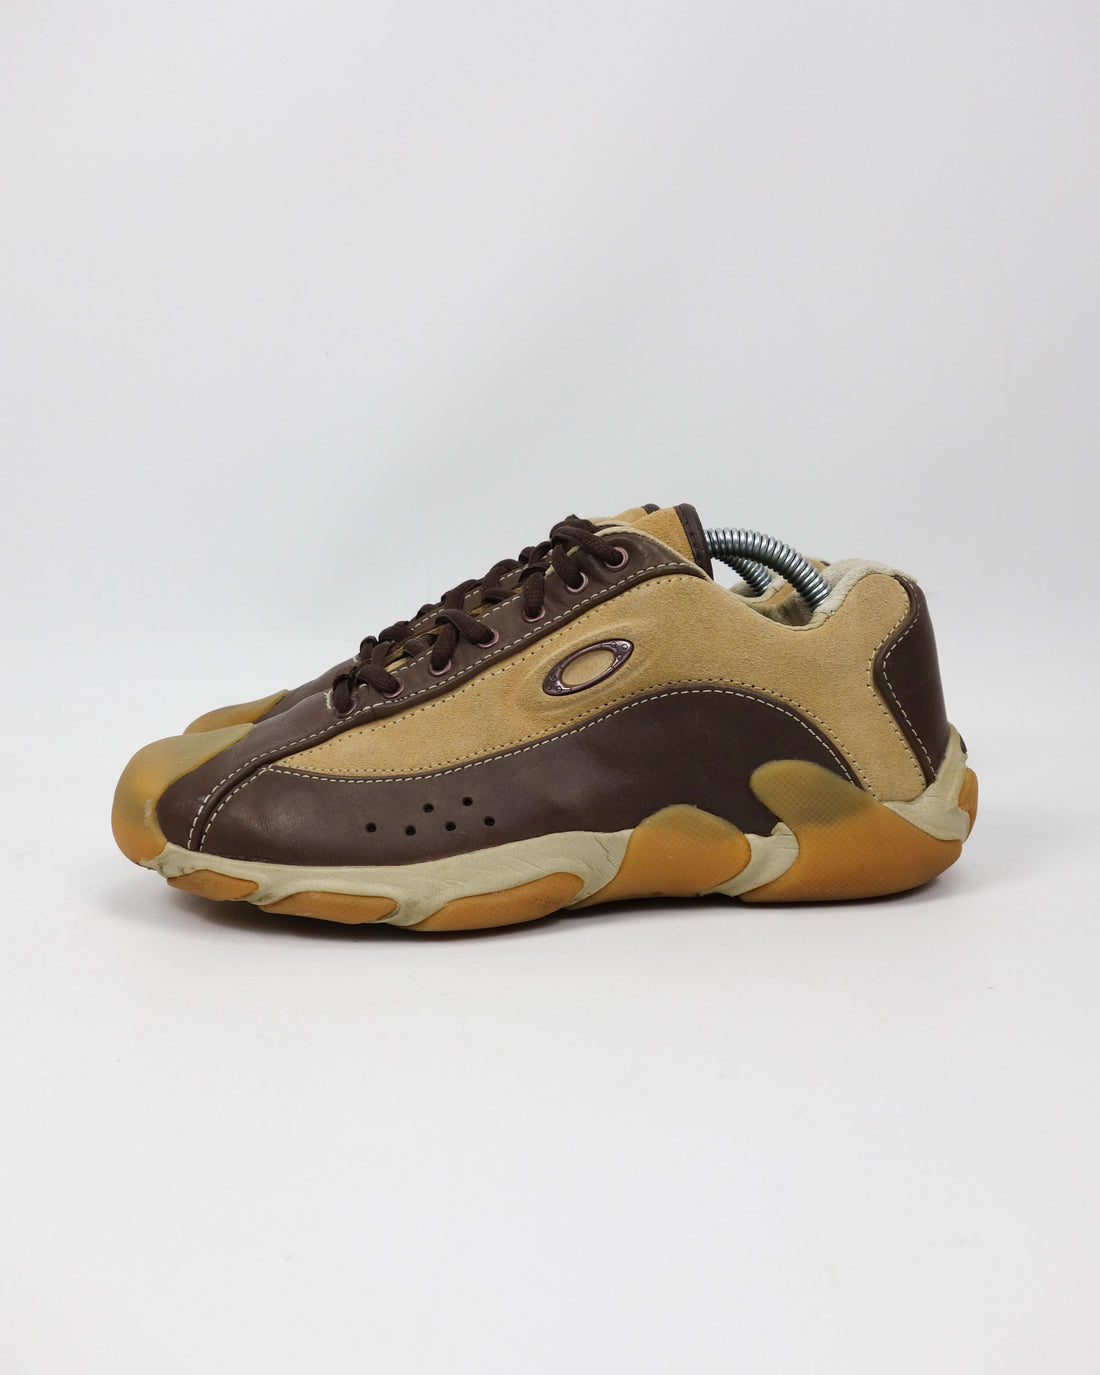 Oakley Twitch Brown Suede Sneakers 2000's